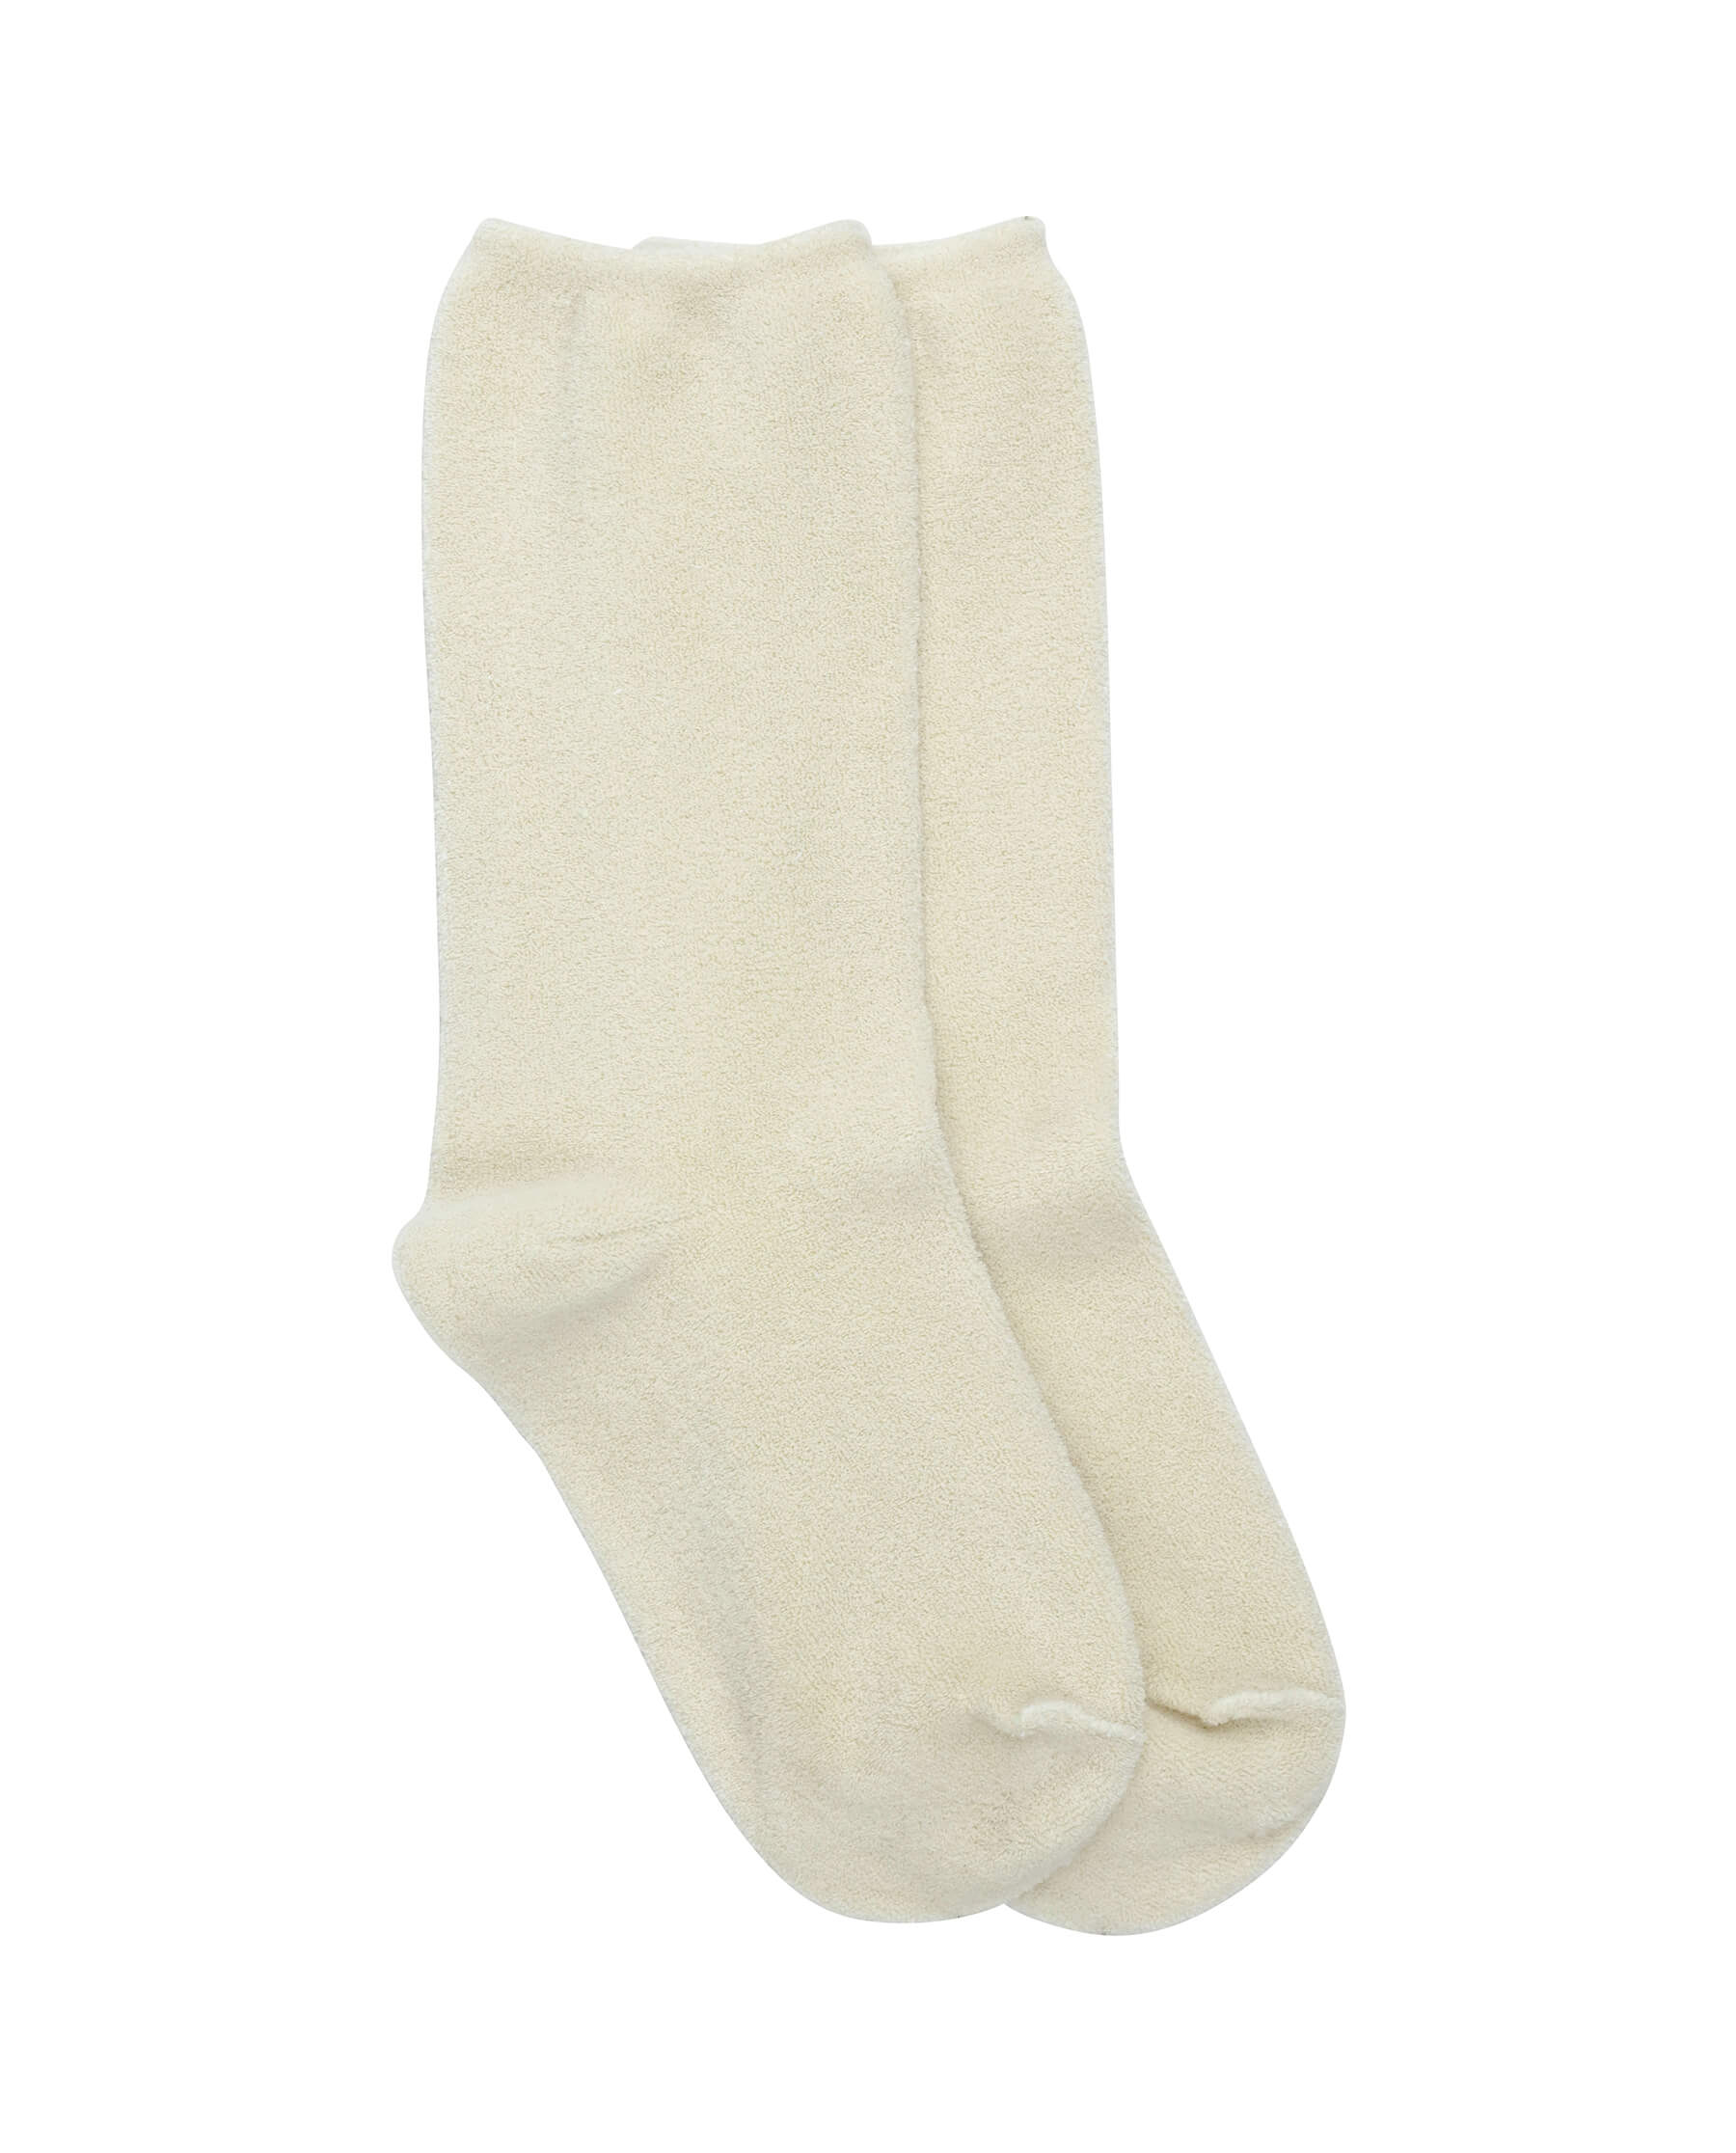 The Microterry Sock. -- Washed White SOCKS THE GREAT. SU23 MICROTERRY